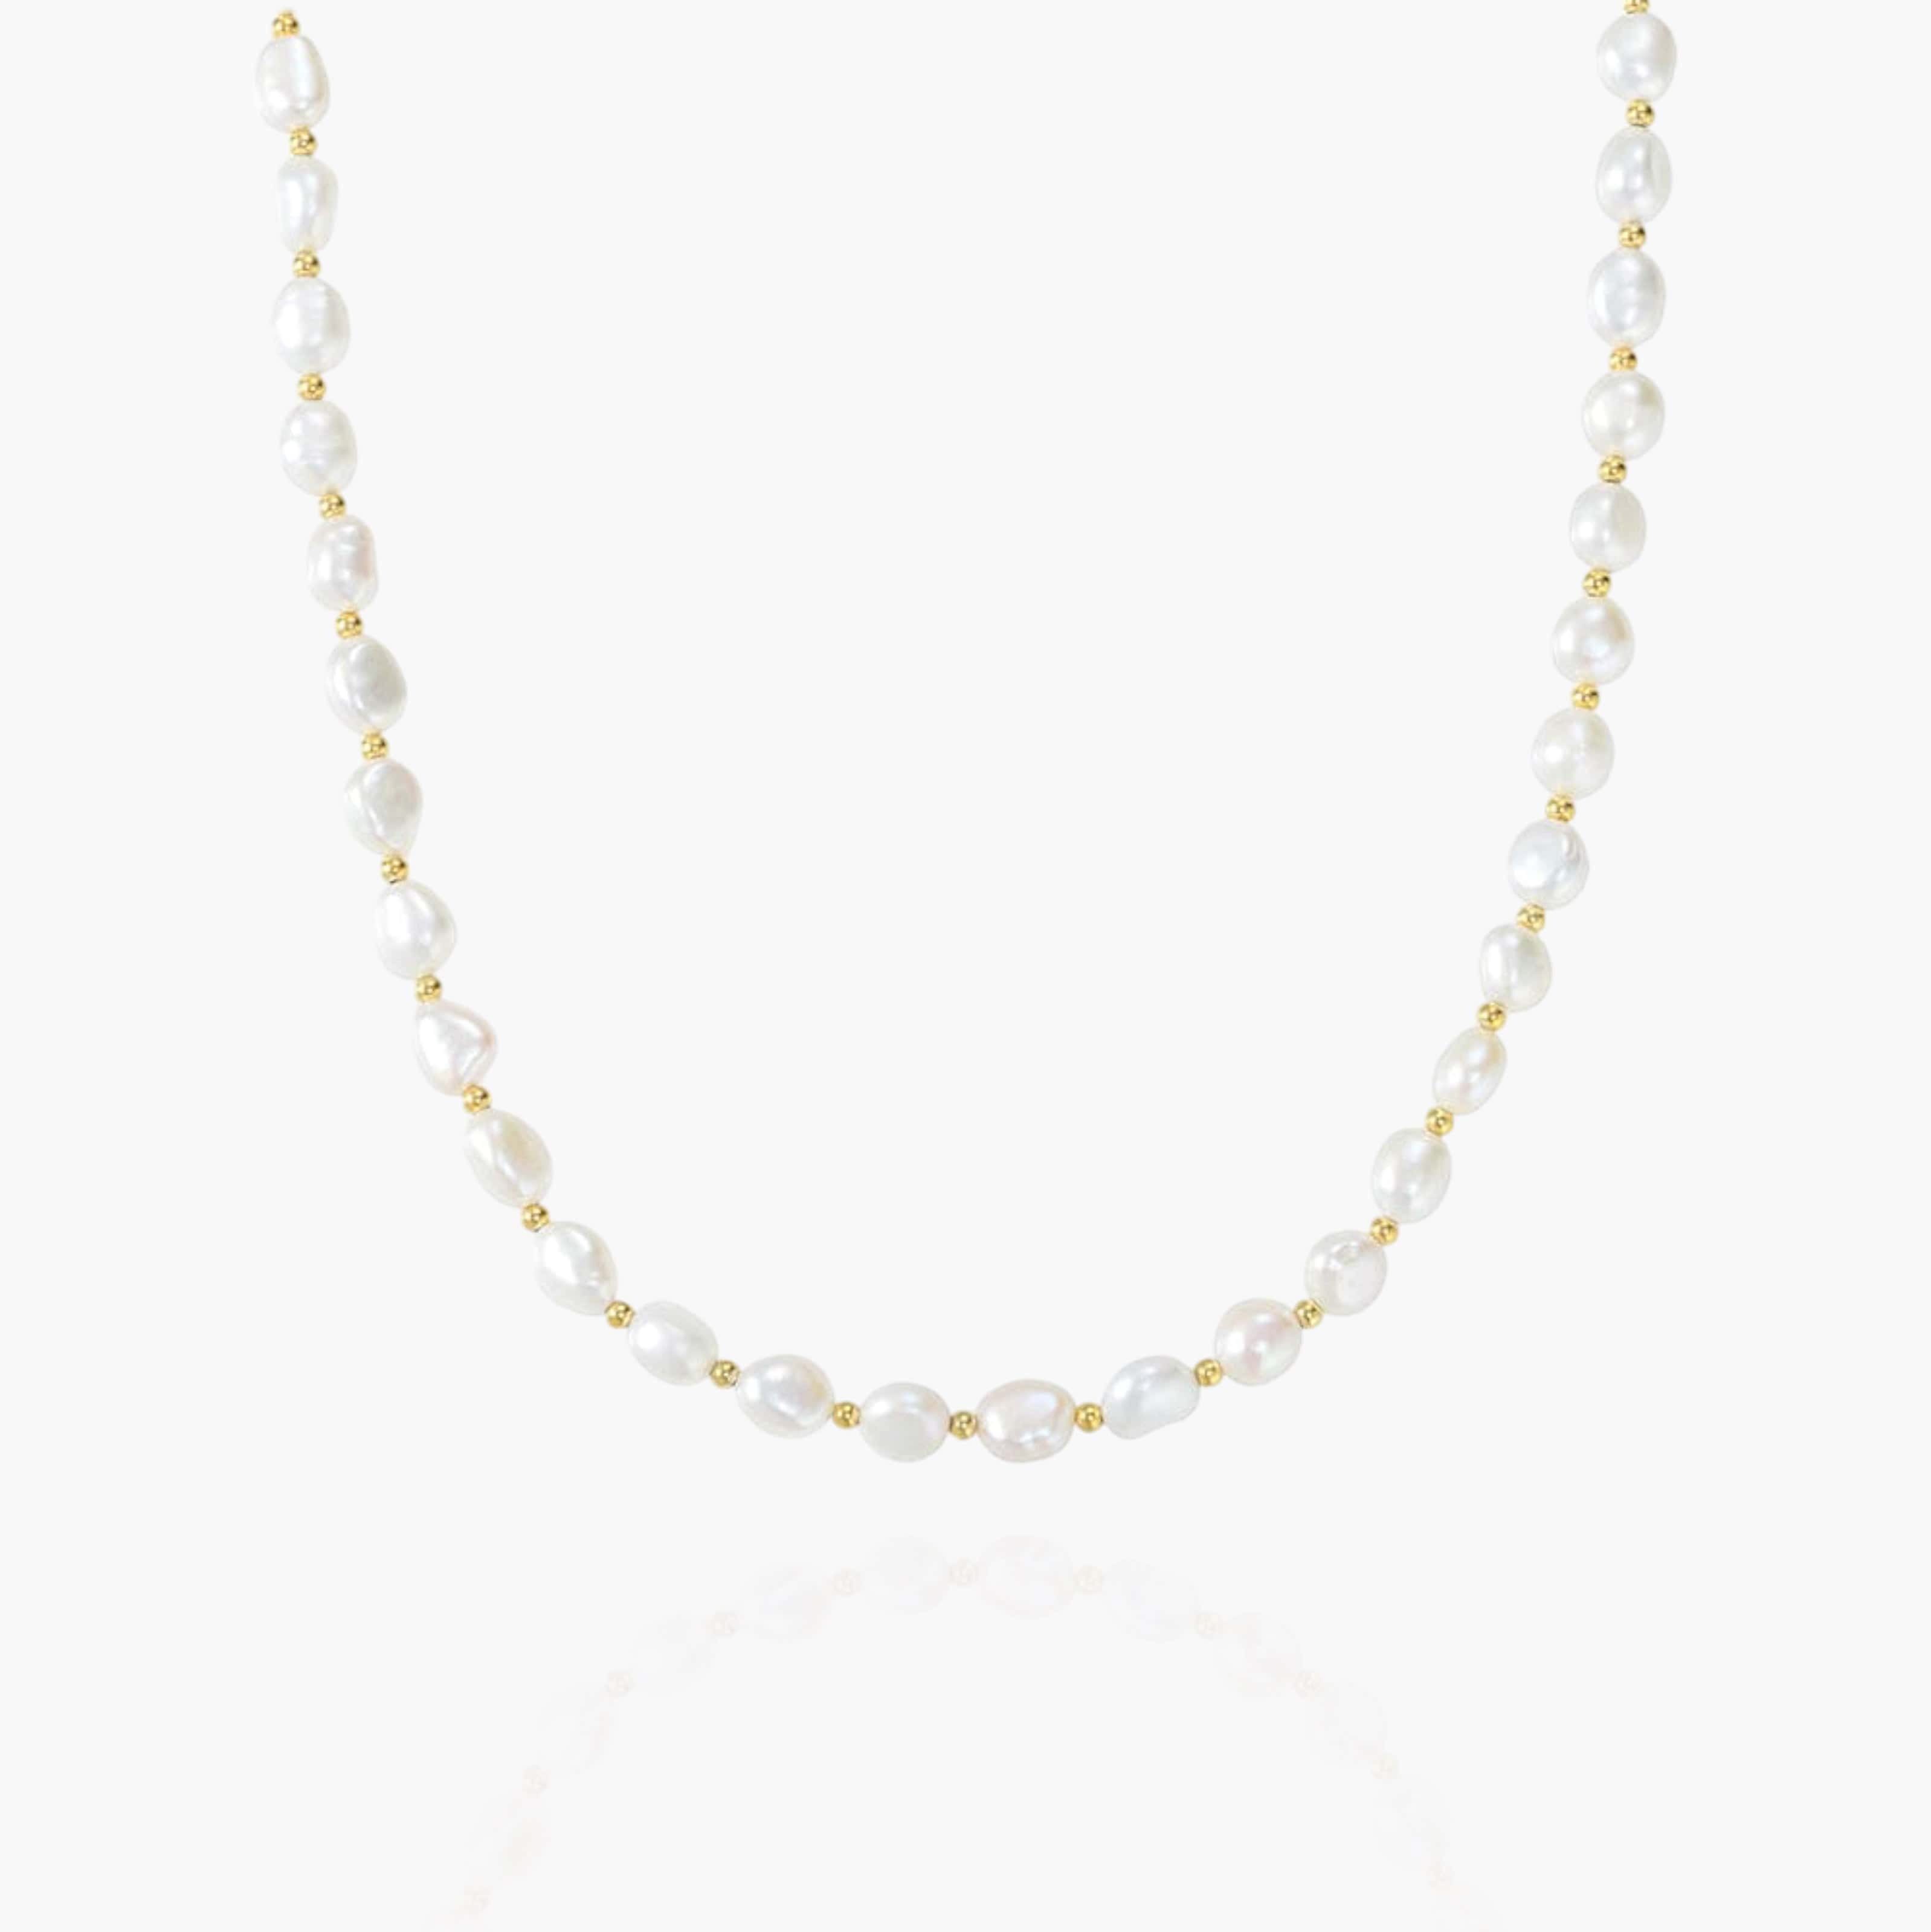 Baroque Pearls Chain 7MM - Gold